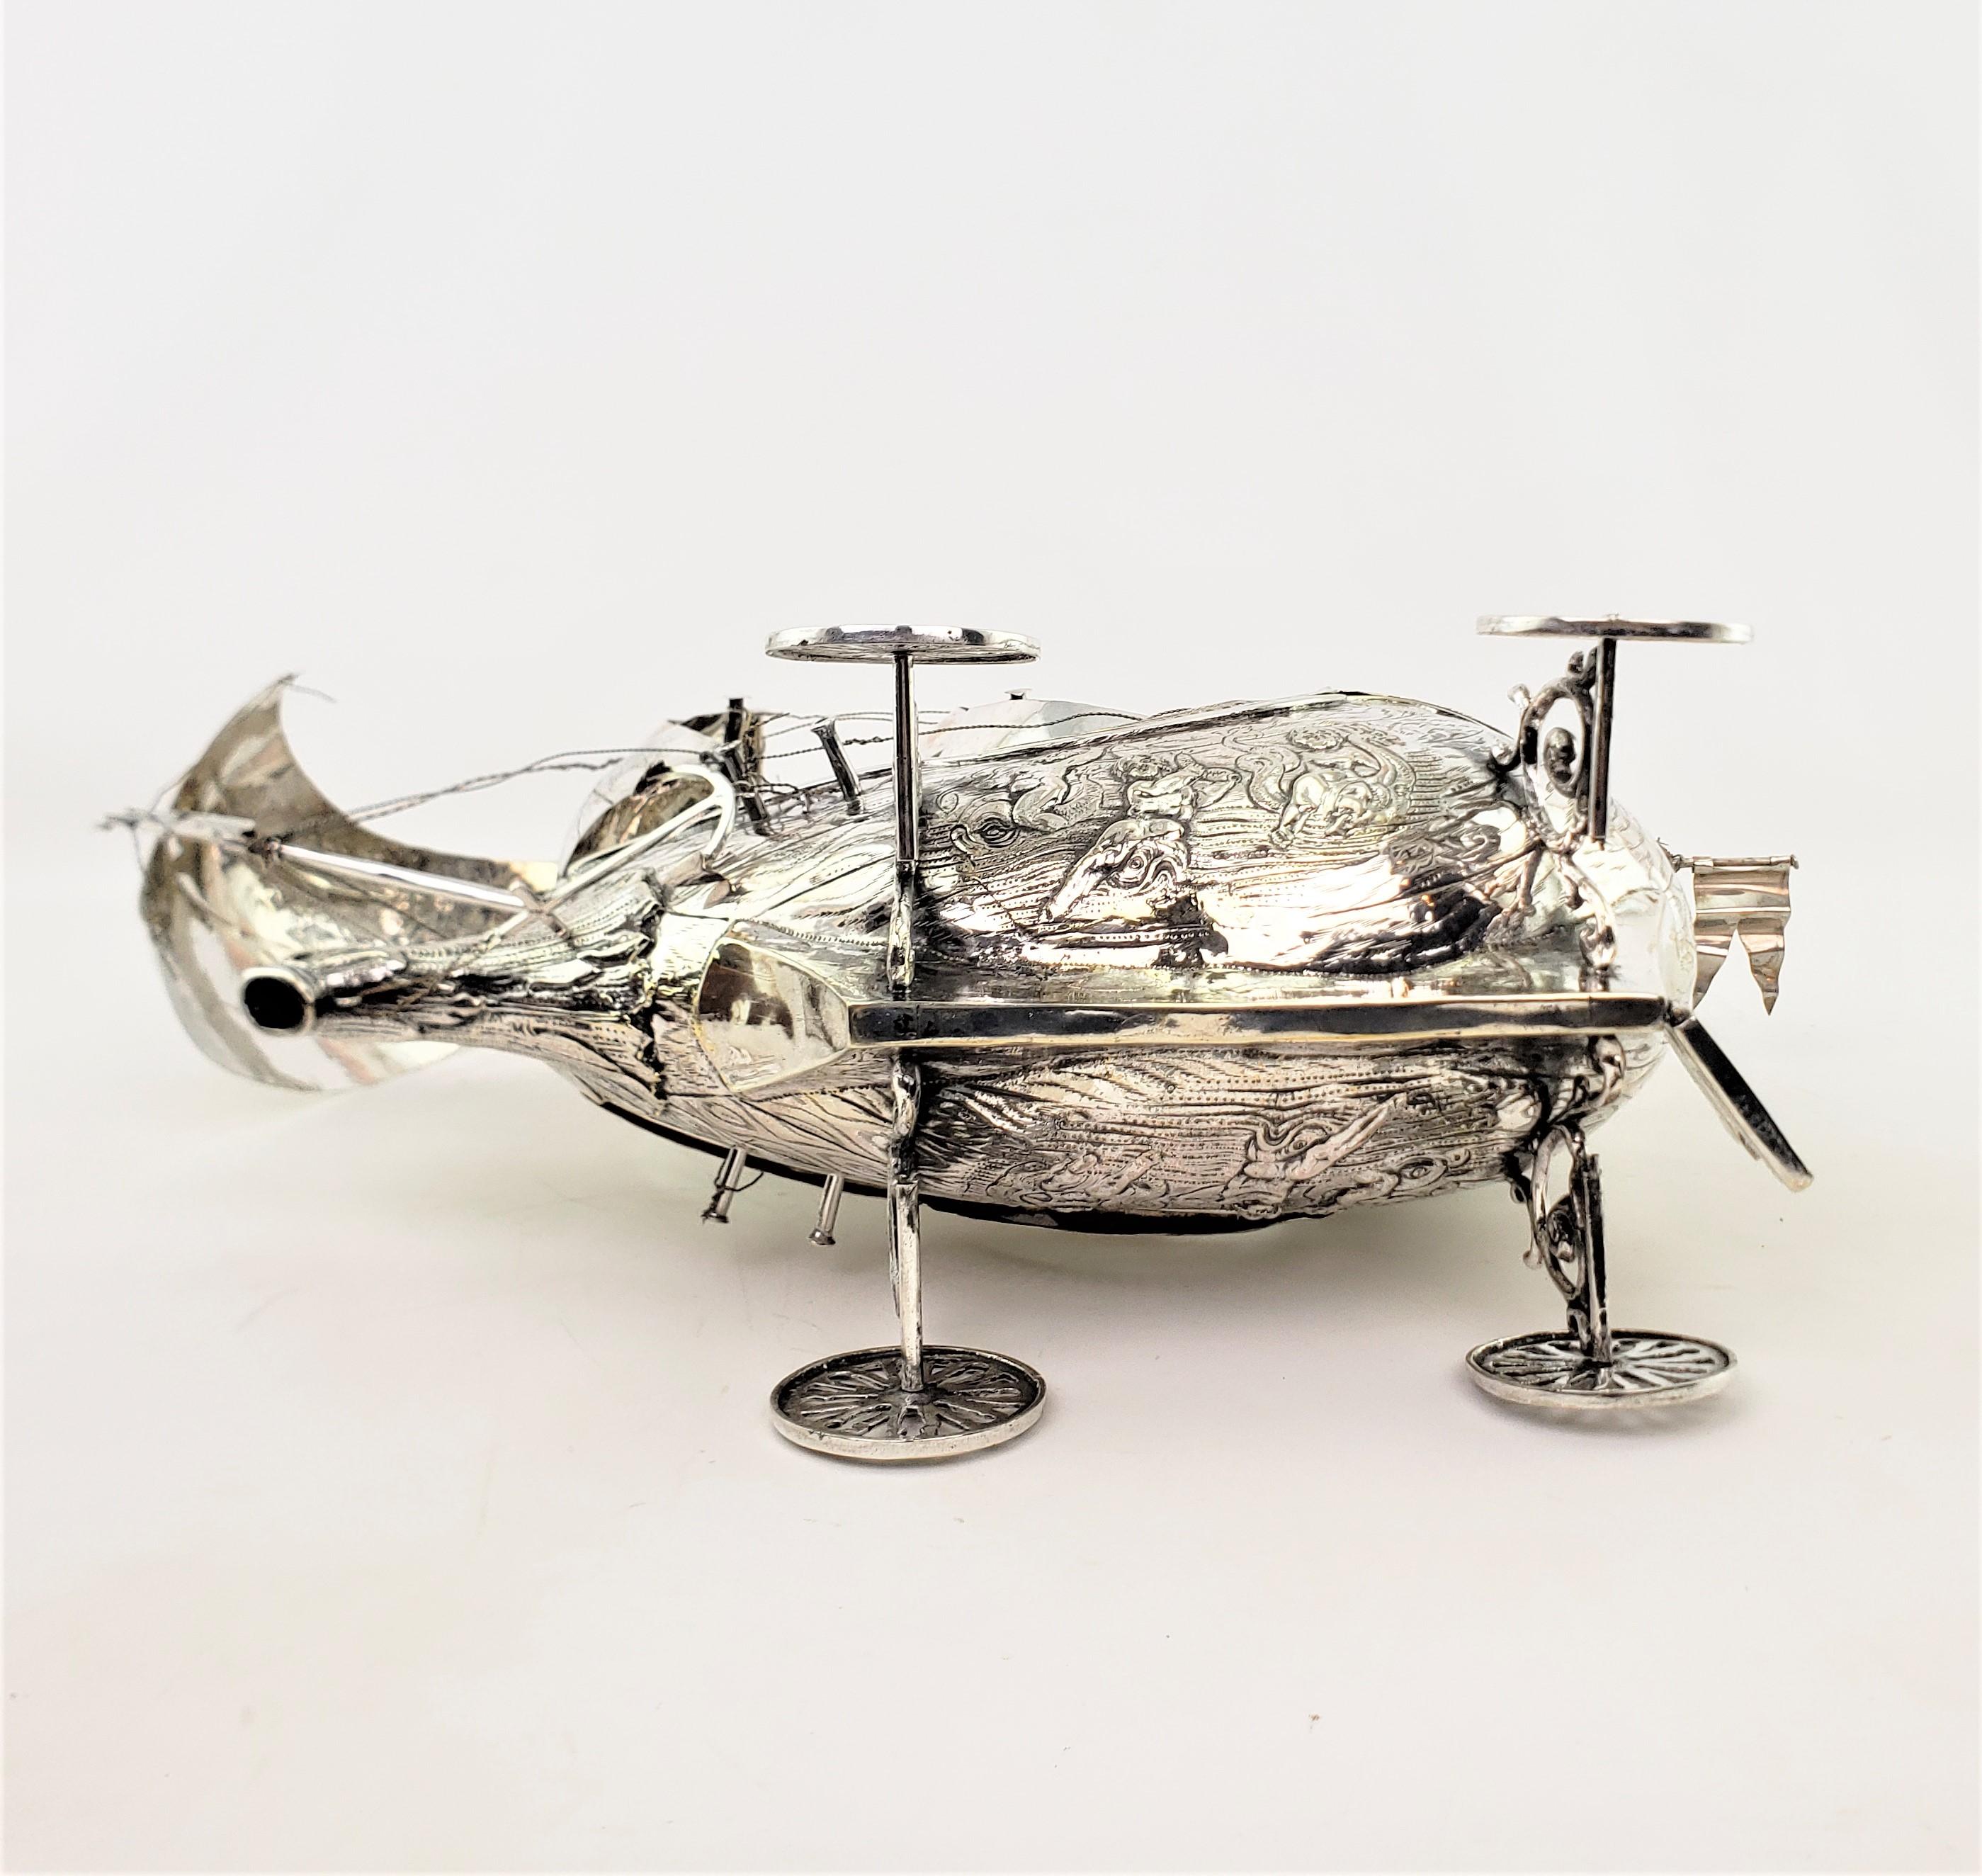 Large Antique Silver Plated Nef or 3 Mast Sailing Ship Sculpture or Centerpiece For Sale 4